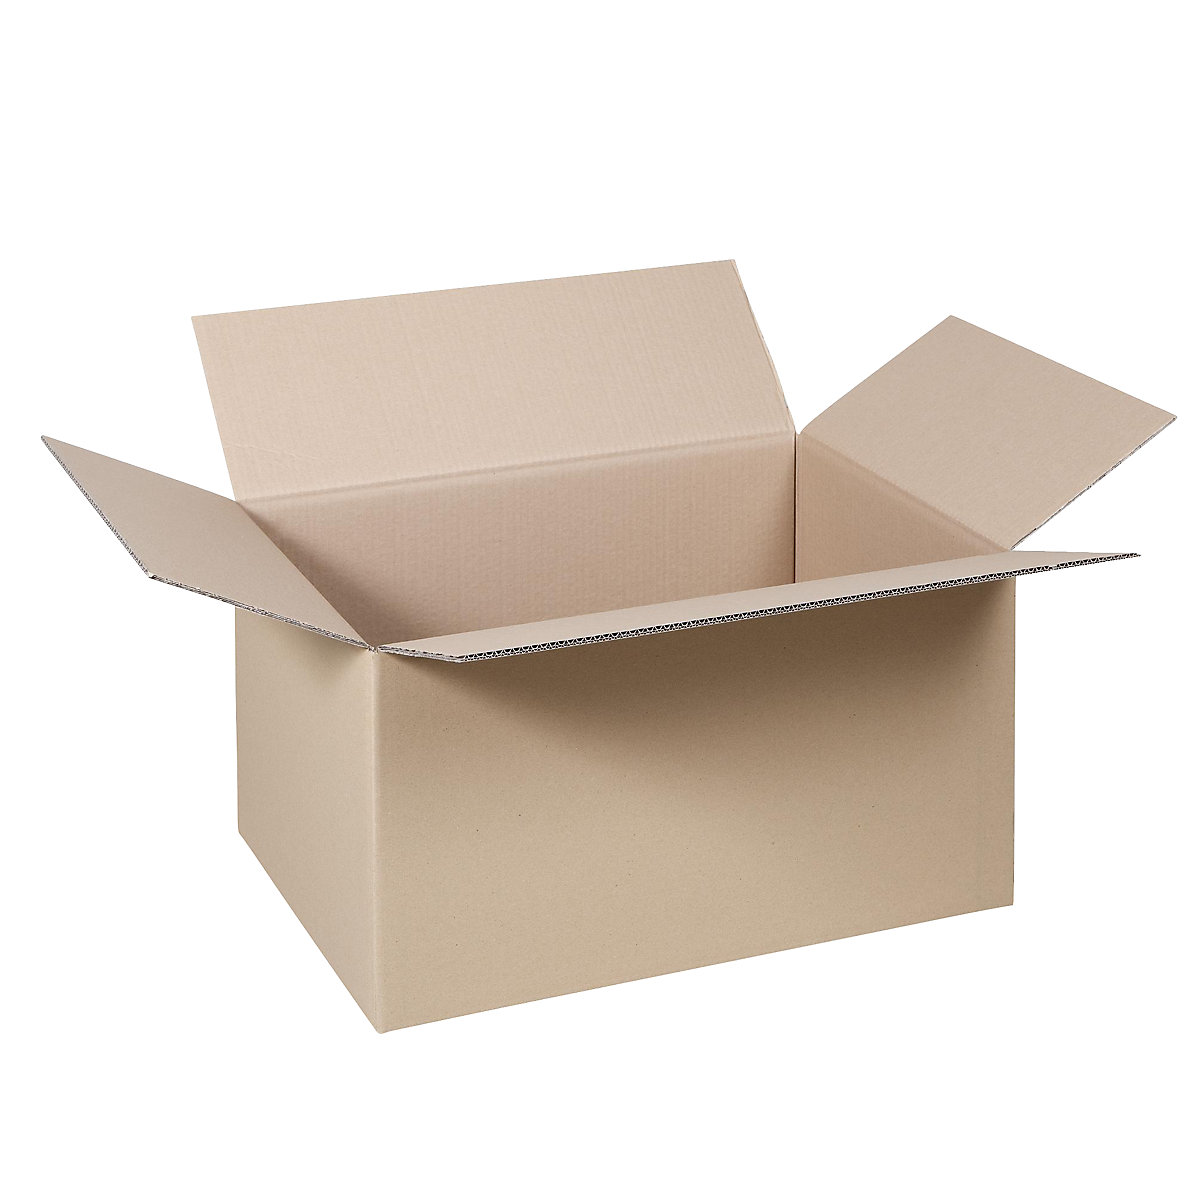 Folding cardboard box, FEFCO 0201, made of double fluted cardboard, internal dimensions 500 x 300 x 300 mm, pack of 100-29